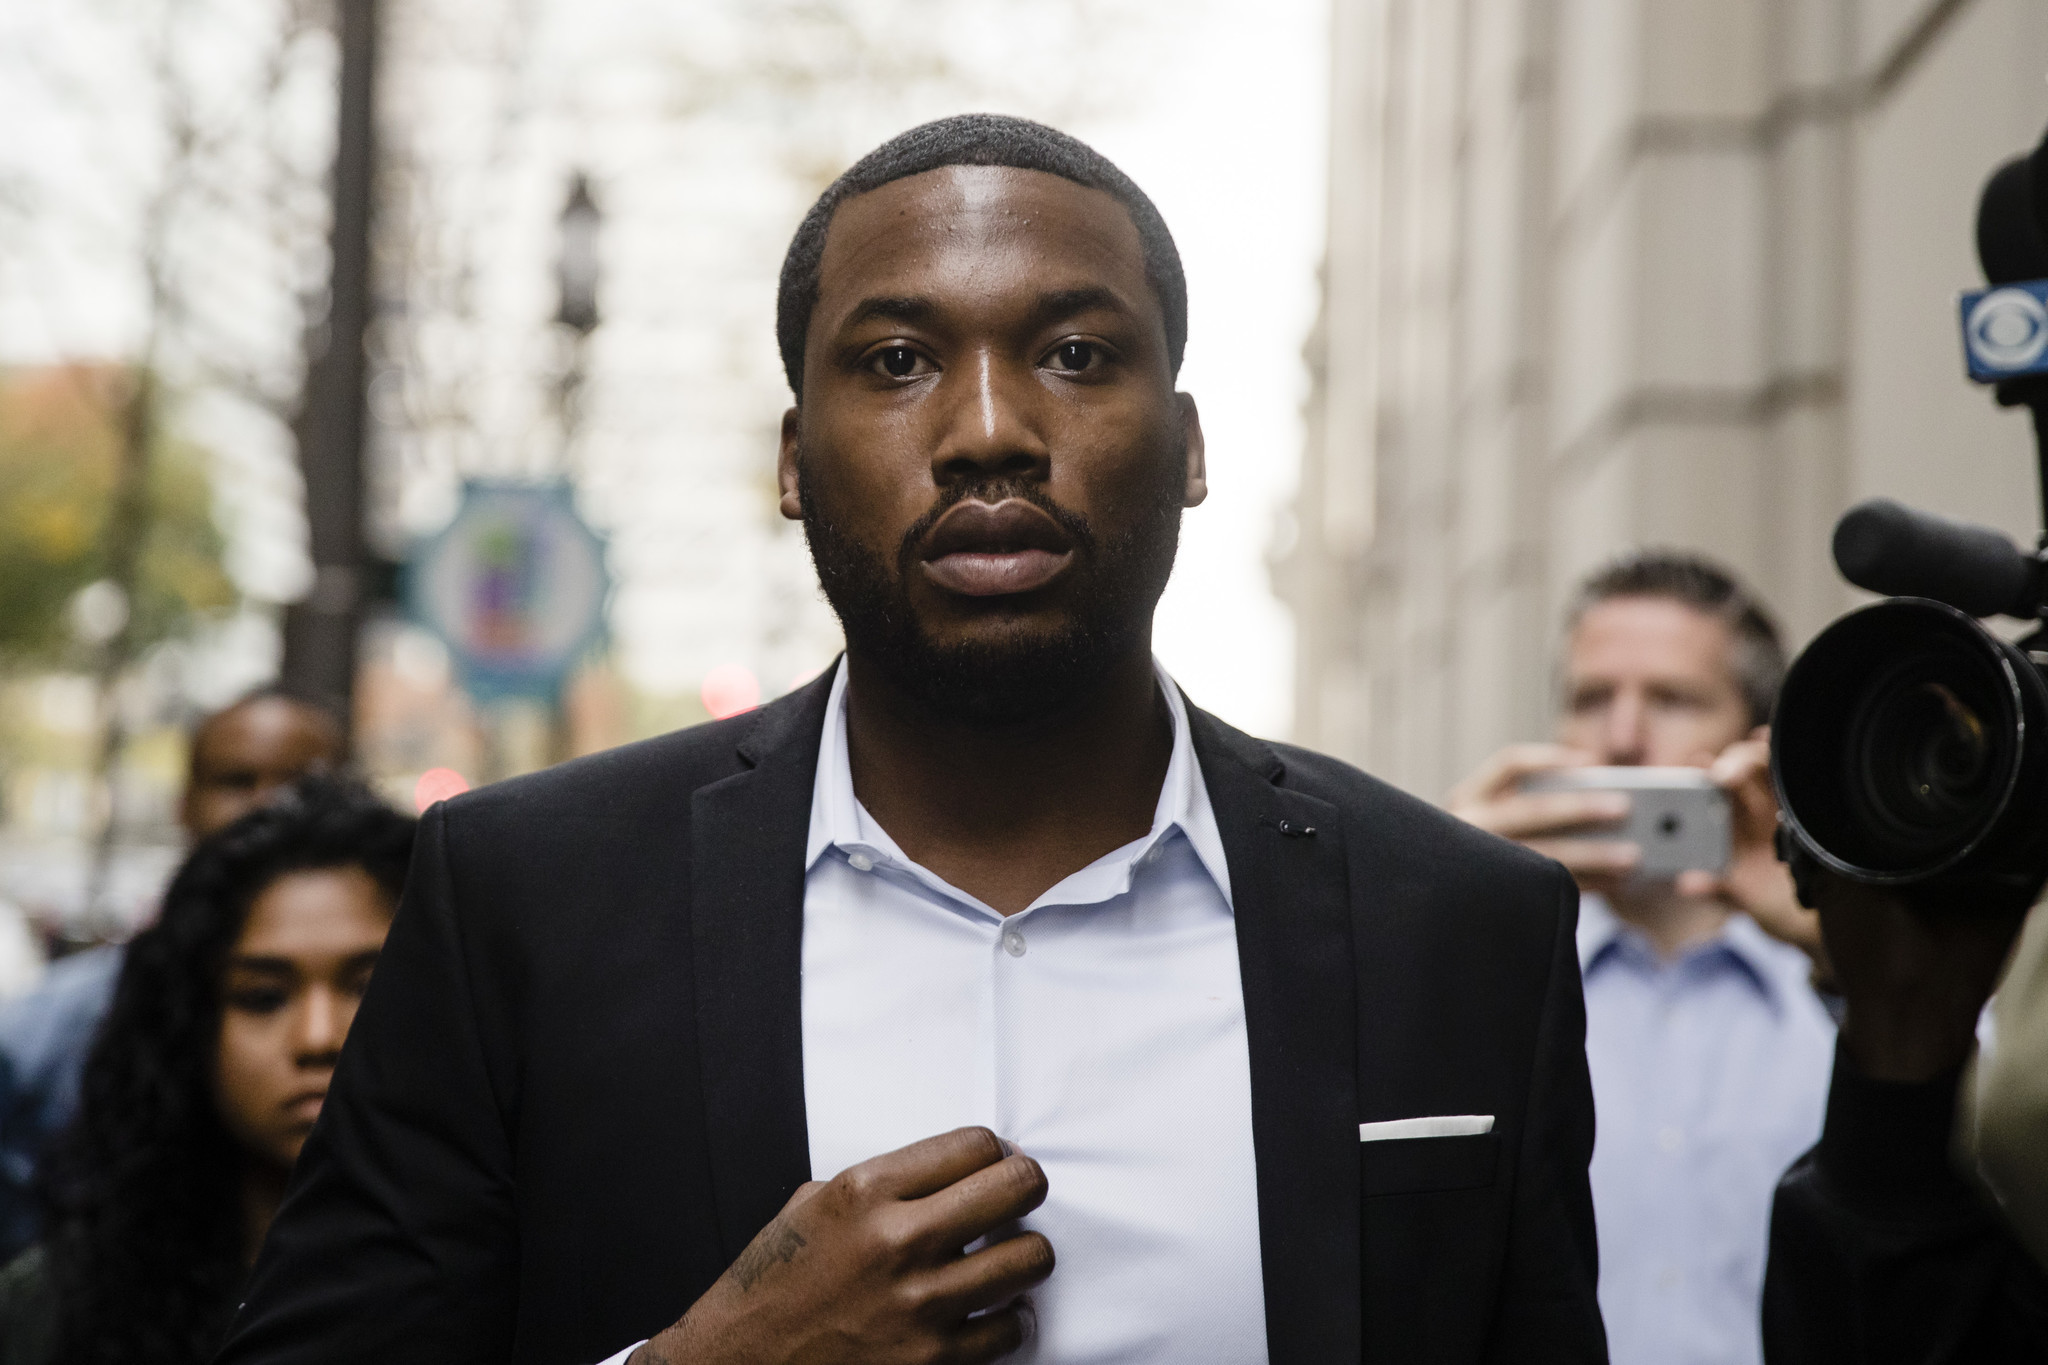 FILE - In this Nov. 6, 2017 file photo rapper Meek Mill arrives at the criminal justice center in Ph